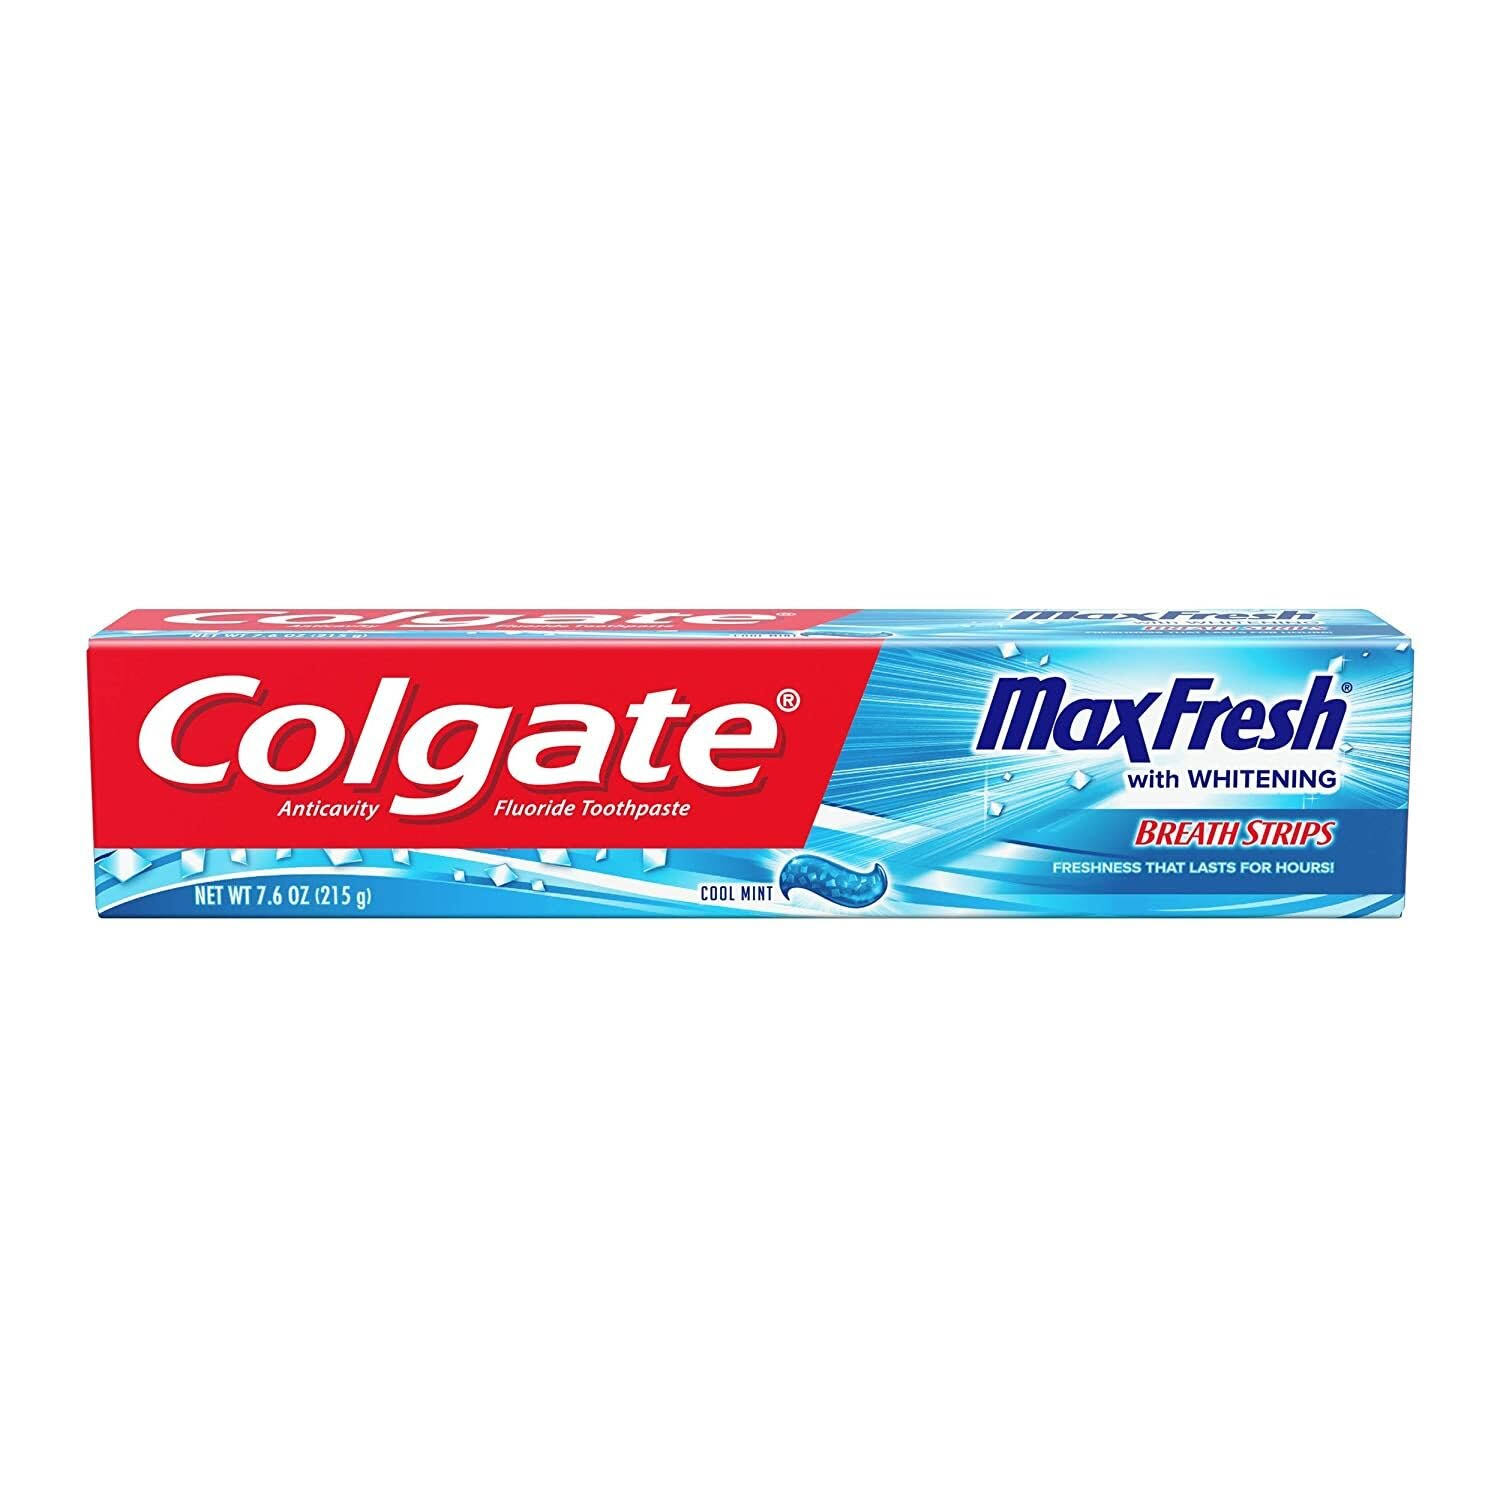 Colgate Max Fresh Toothpaste with Mini Breath Strips, Cool Mint, 220ml